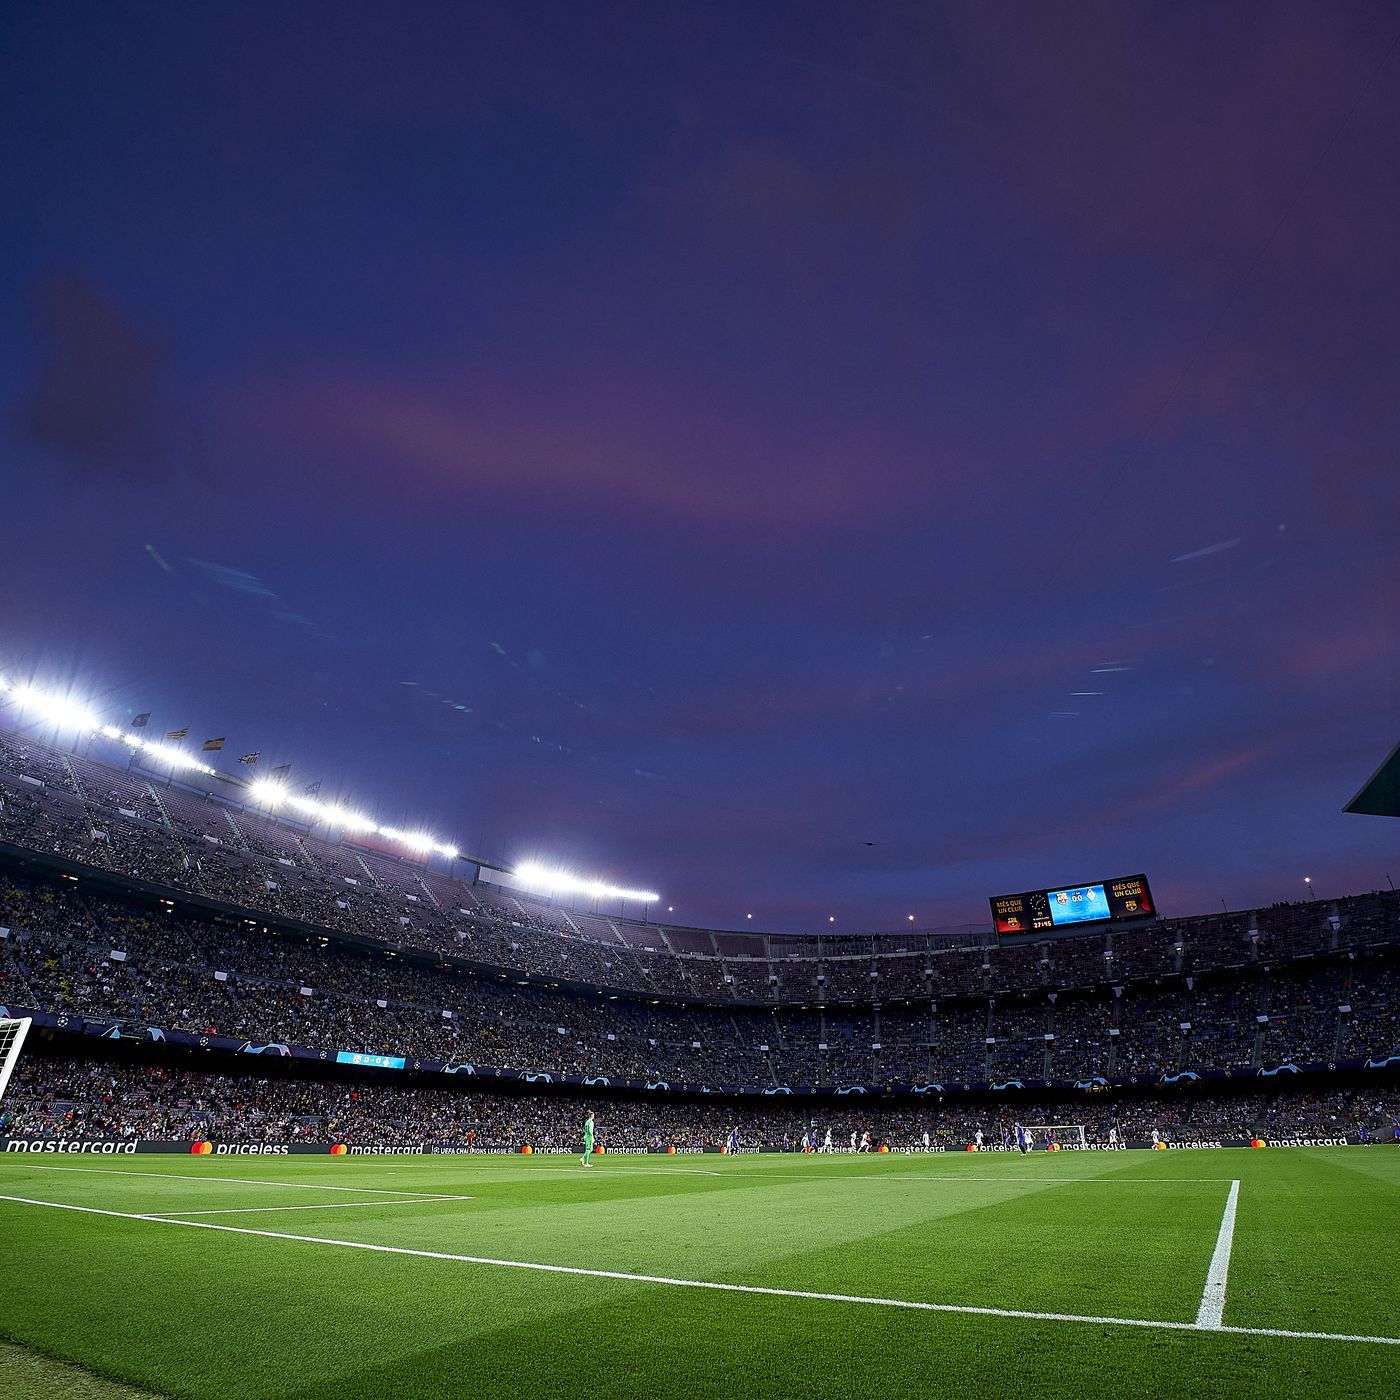 A general view of the Camp Nou stadium - Soccer